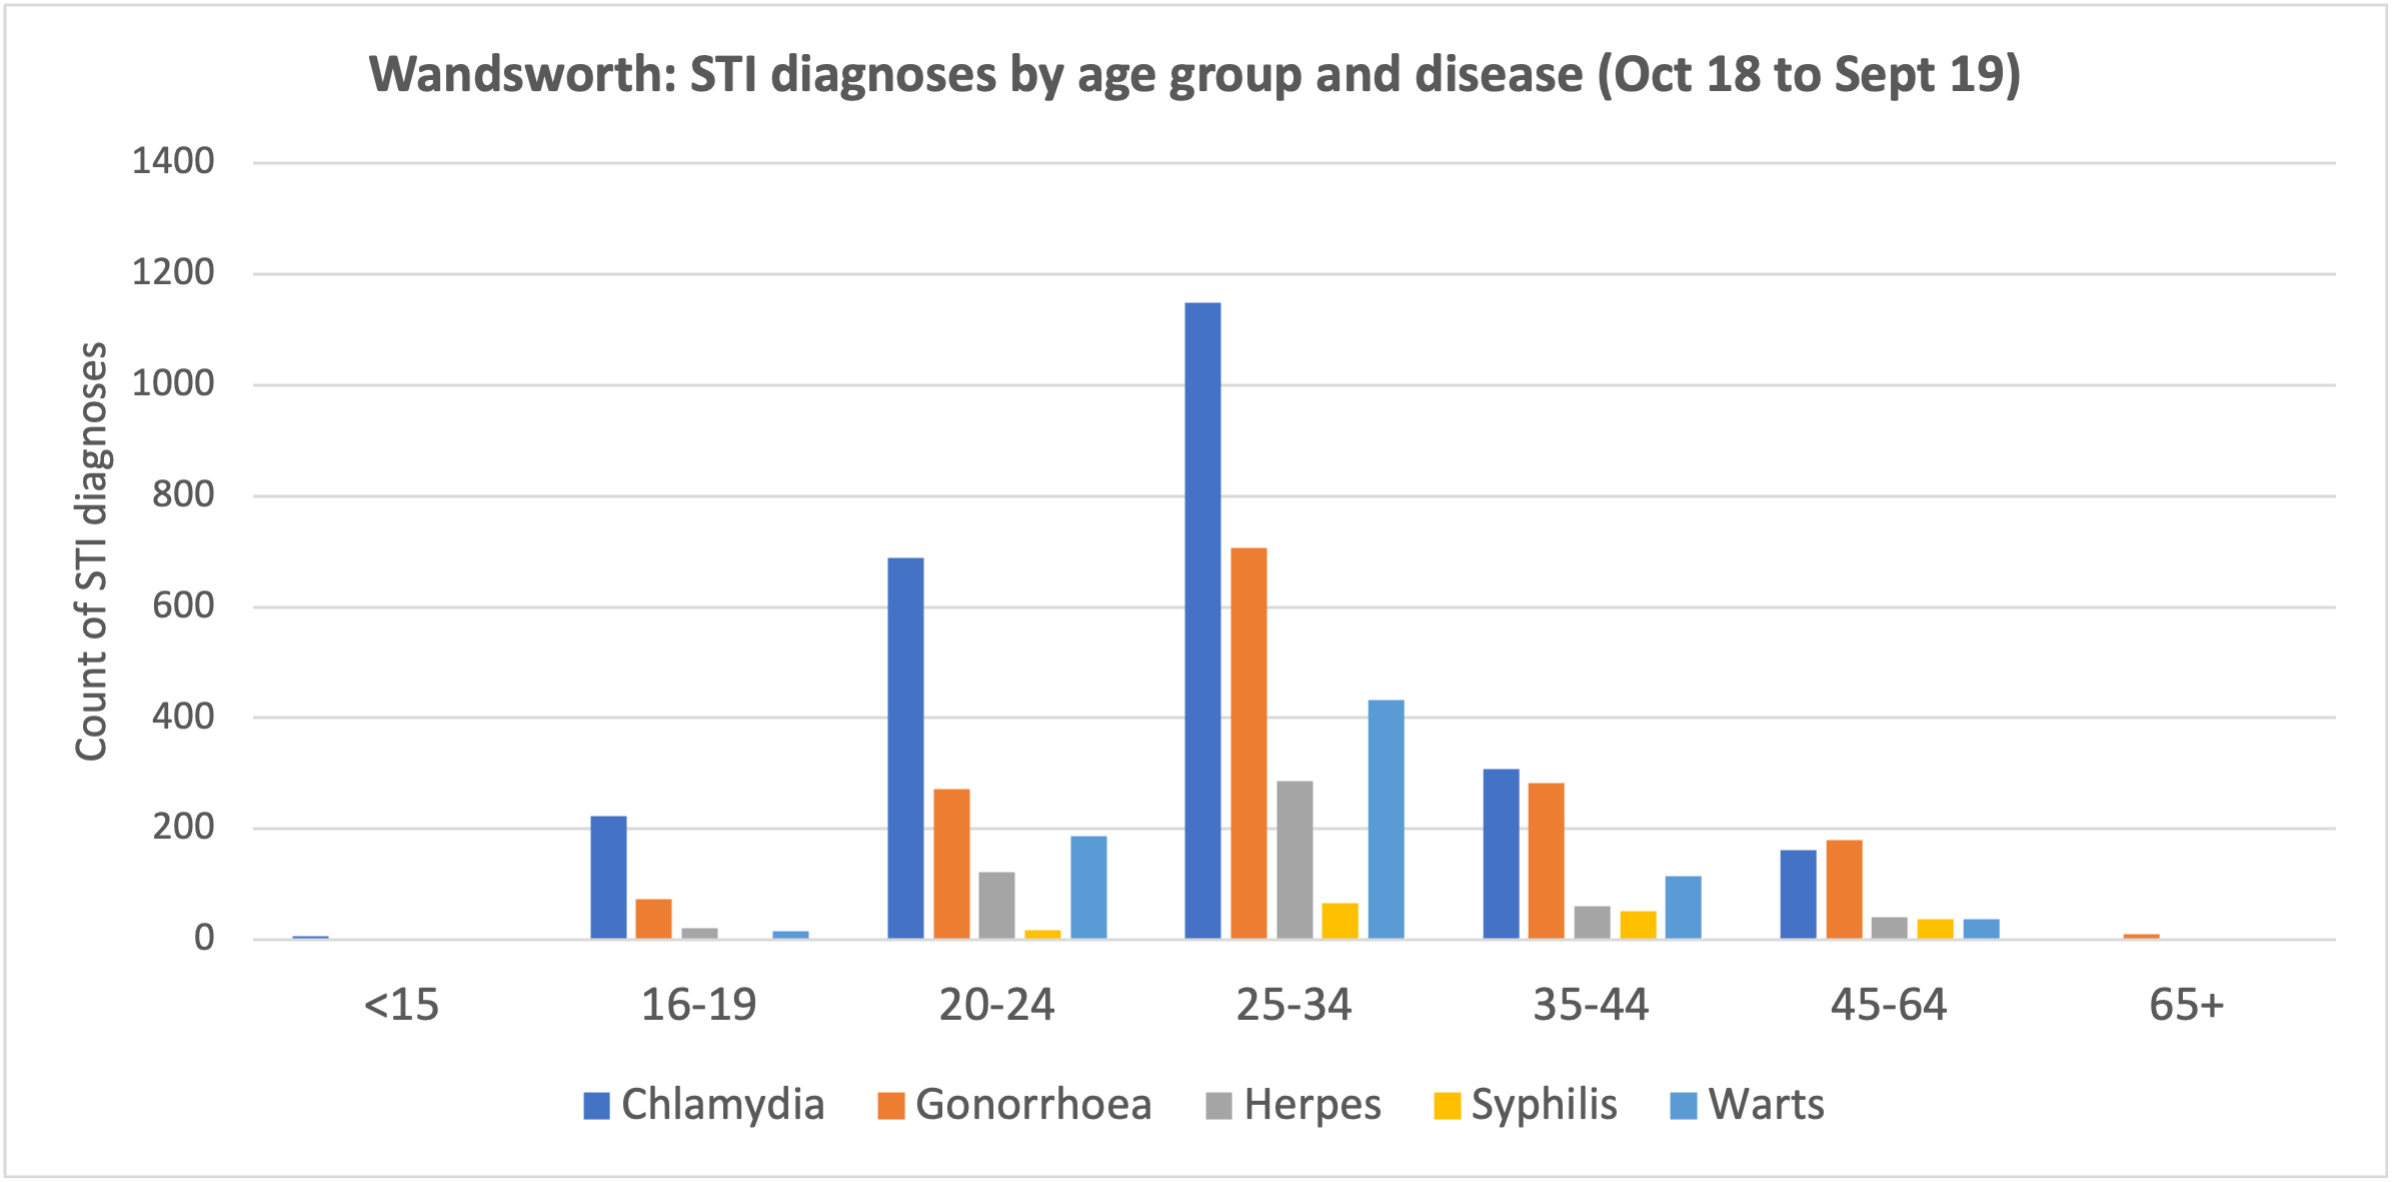 Sexually transmitted infections in Wandsworth by disease and age group, October 2018 – September 2019